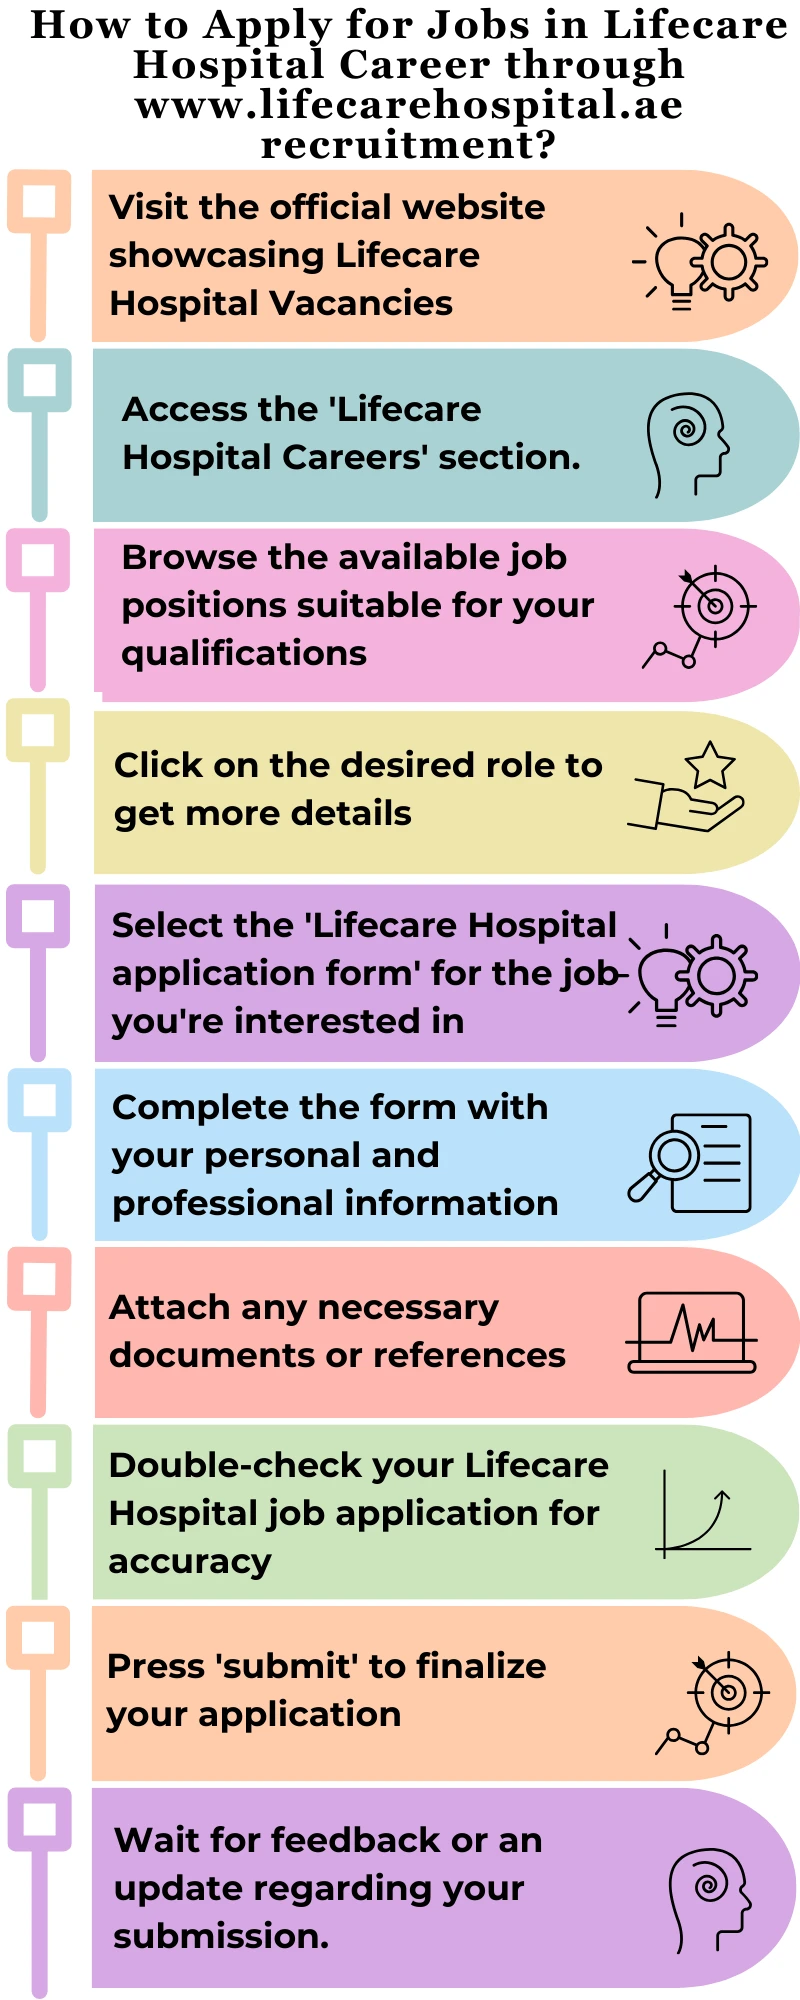 How to Apply for Jobs in Lifecare Hospital Career through www.lifecarehospital.ae recruitment?